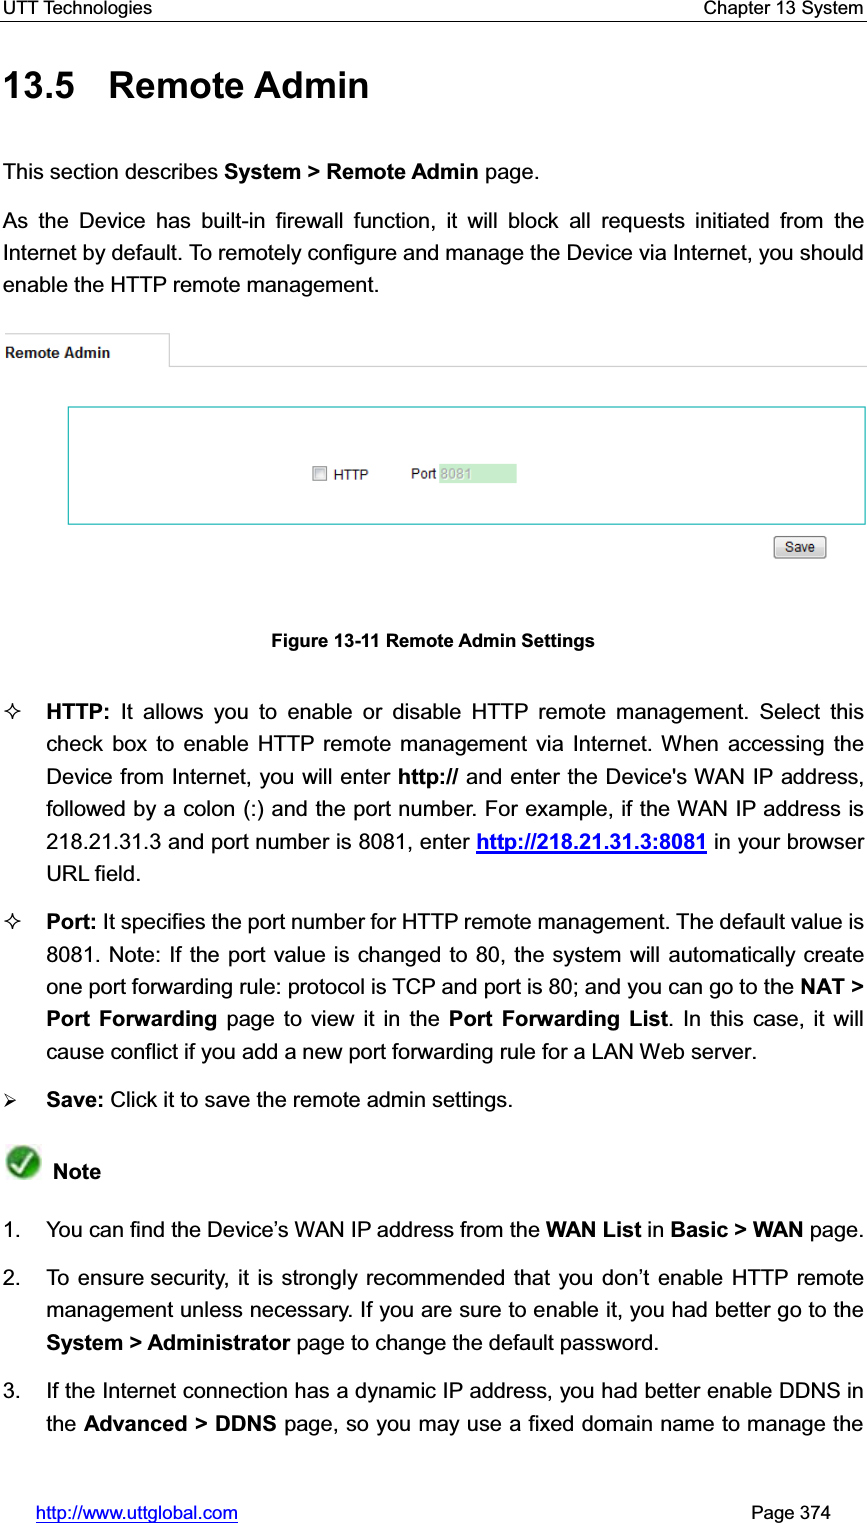 UTT Technologies    Chapter 13 System   http://www.uttglobal.com                                                       Page 374 13.5 Remote Admin This section describes System &gt; Remote Admin page. As the Device has built-in firewall function, it will block all requests initiated from the Internet by default. To remotely configure and manage the Device via Internet, you should enable the HTTP remote management.   Figure 13-11 Remote Admin Settings HTTP:  It allows you to enable or disable HTTP remote management. Select this check box to enable HTTP remote management via Internet. When accessing the Device from Internet, you will enter http:// and enter the Device&apos;s WAN IP address, followed by a colon (:) and the port number. For example, if the WAN IP address is 218.21.31.3 and port number is 8081, enter http://218.21.31.3:8081 in your browser URL field. Port: It specifies the port number for HTTP remote management. The default value is 8081. Note: If the port value is changed to 80, the system will automatically create one port forwarding rule: protocol is TCP and port is 80; and you can go to the NAT &gt; Port Forwarding page to view it in the Port Forwarding List. In this case, it will cause conflict if you add a new port forwarding rule for a LAN Web server. ¾Save: Click it to save the remote admin settings. Note1. You can find WKH&apos;HYLFH¶V:$1,3DGGUHVVIURPWKHWAN List in Basic &gt; WAN page. 2.  To ensure security, it is strongly recommended that you GRQ¶t enable HTTP remote management unless necessary. If you are sure to enable it, you had better go to theSystem &gt; Administrator page to change the default password. 3.  If the Internet connection has a dynamic IP address, you had better enable DDNS in the Advanced &gt; DDNS page, so you may use a fixed domain name to manage the 